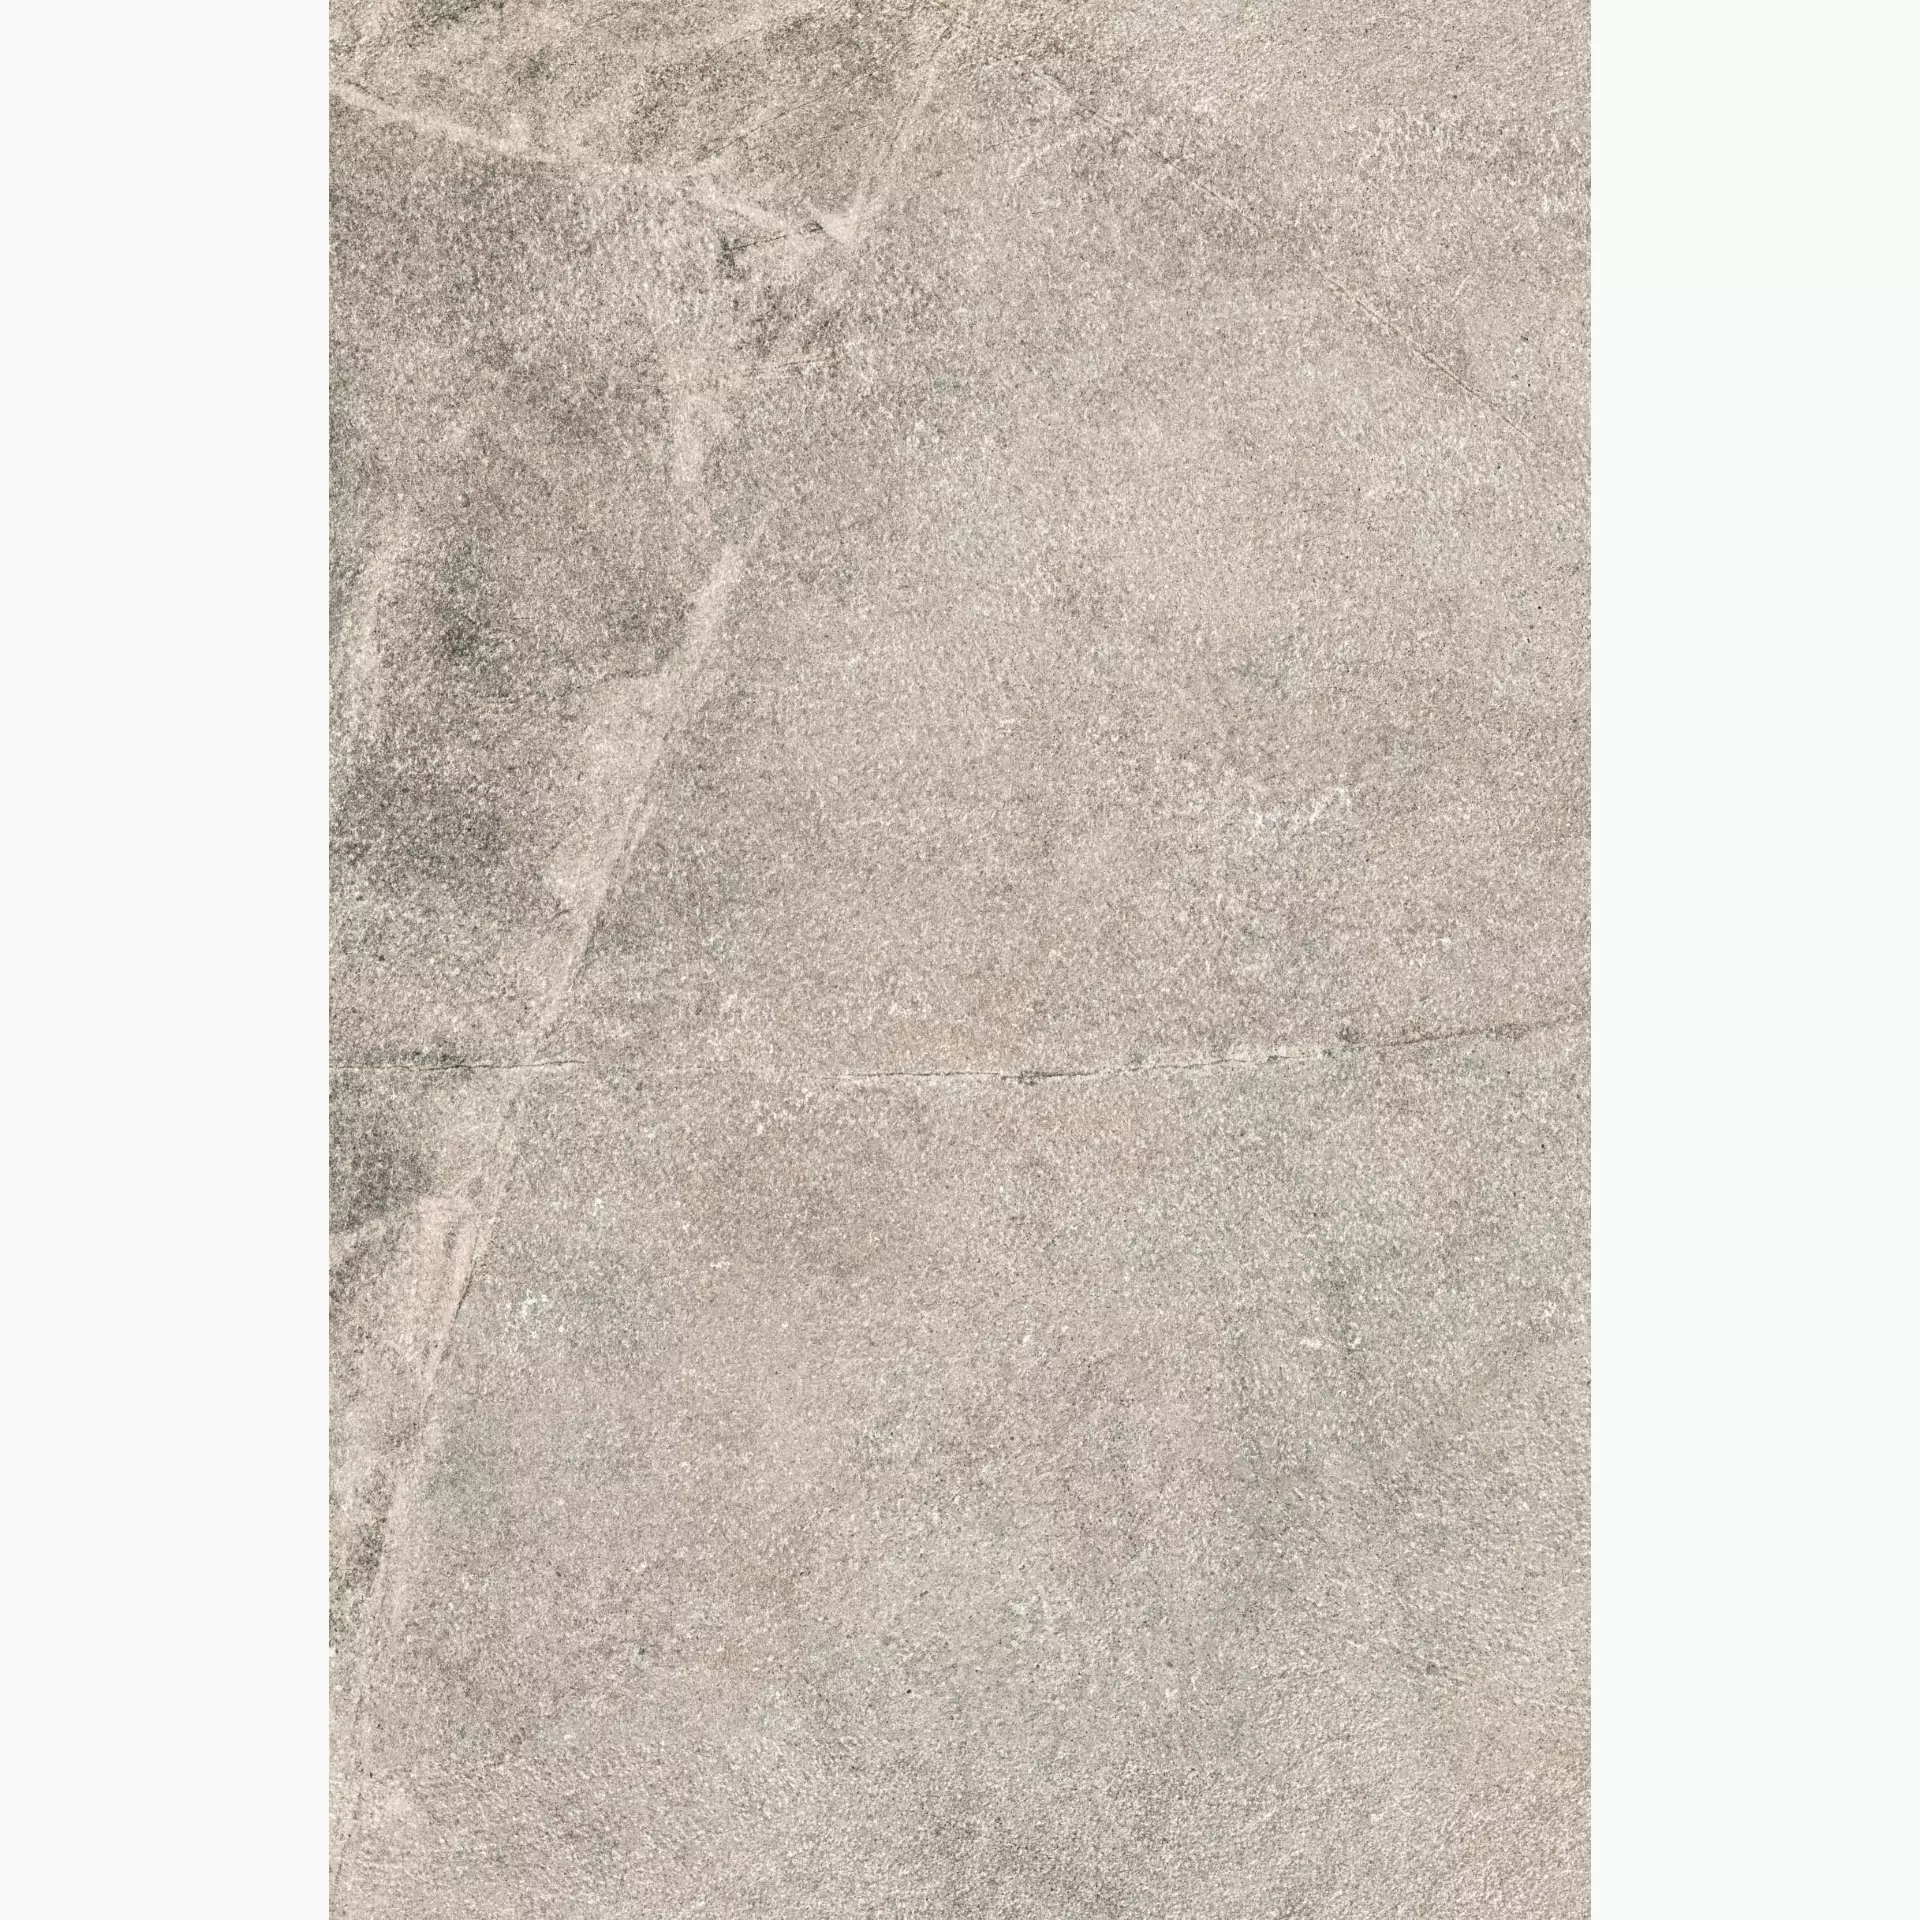 ABK Out.20 Atlantis Sand Hammered Outdoor PF60007176 60x90cm rectified 20mm